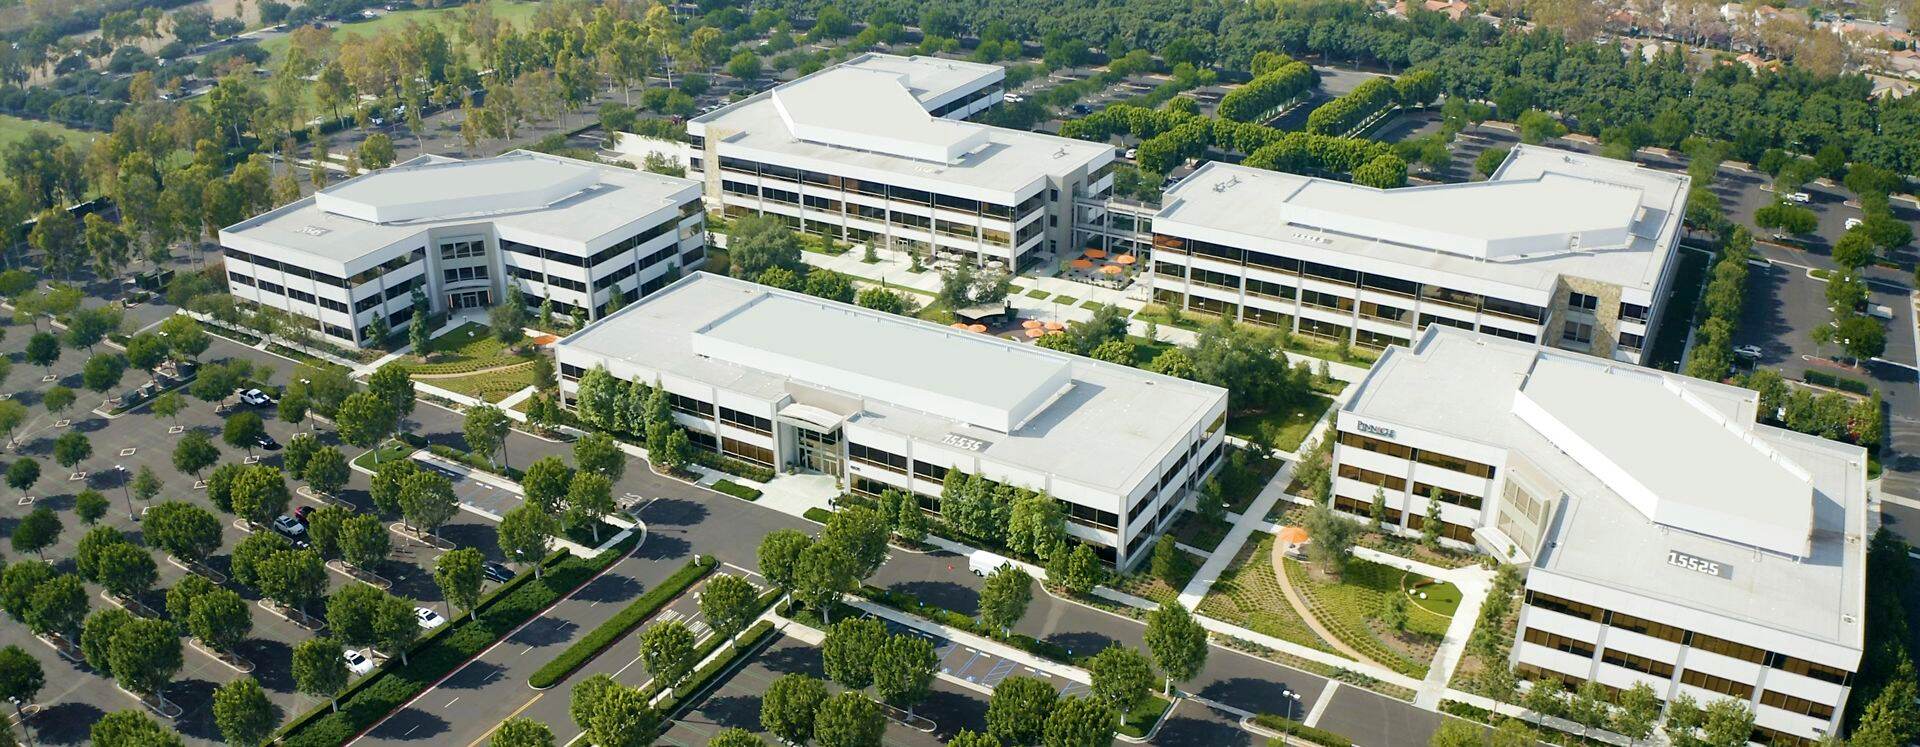 Aerial of Sand Canyon Business Center in Irvine, CA.